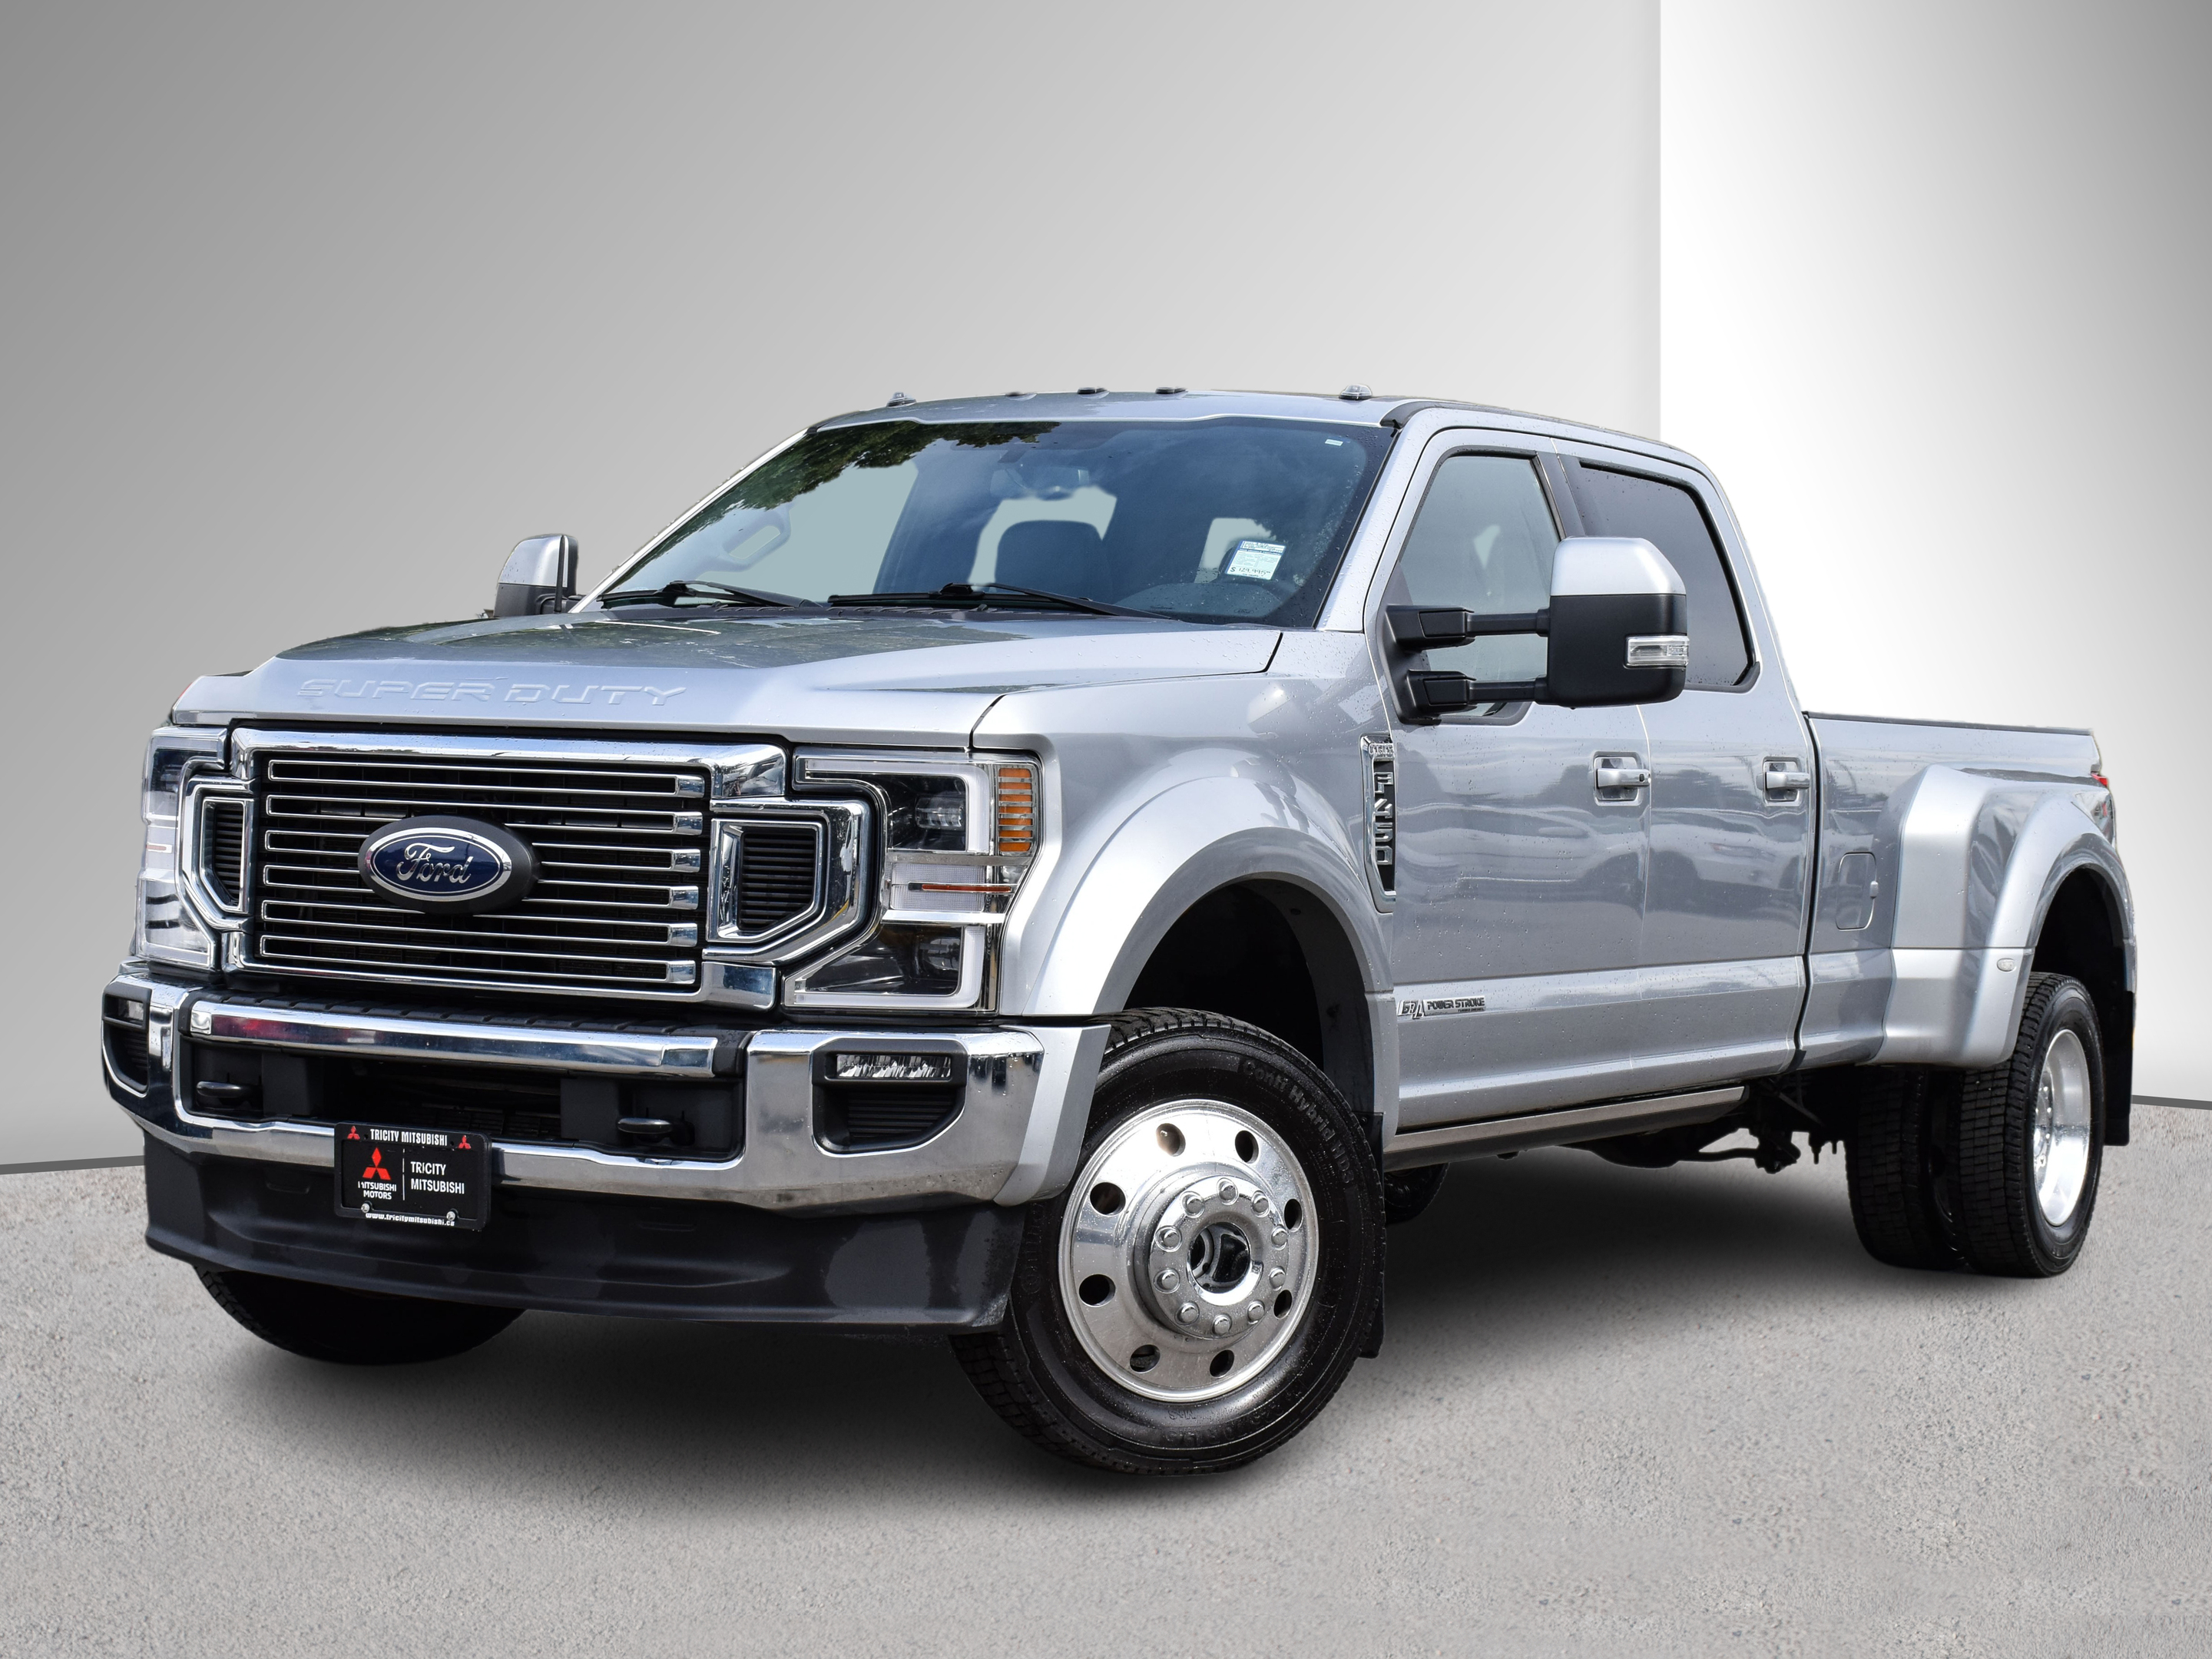 2022 Ford F-450 SUPER DUTY Lariat - Leather, Navigation, Ventilated Seats